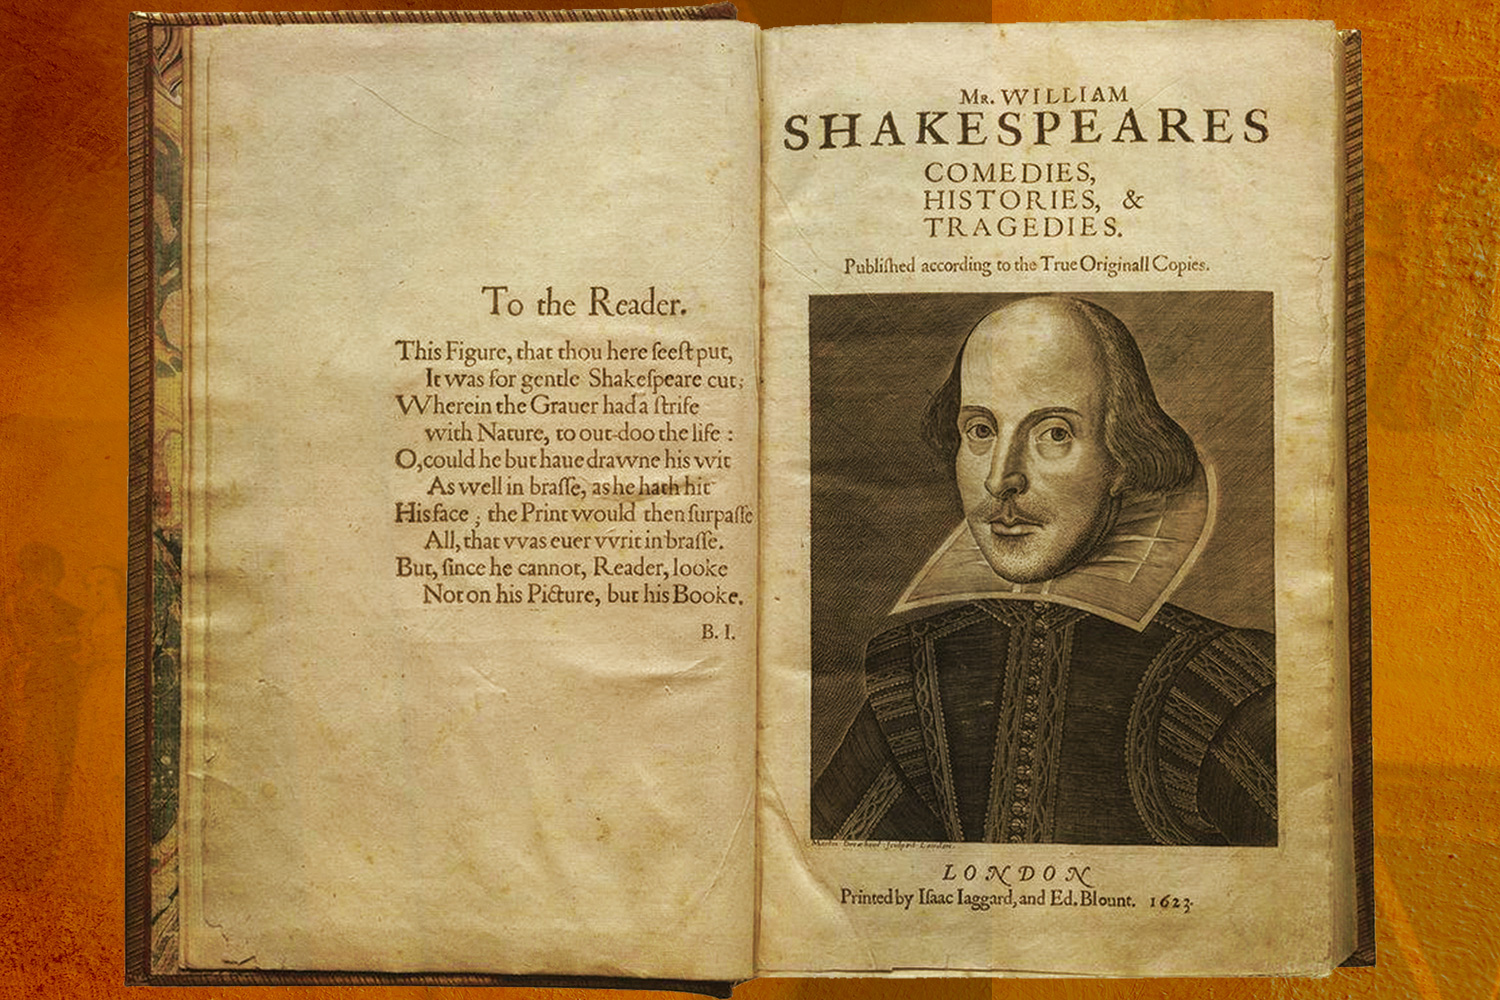 Open book by William Shakespeare in a glass case